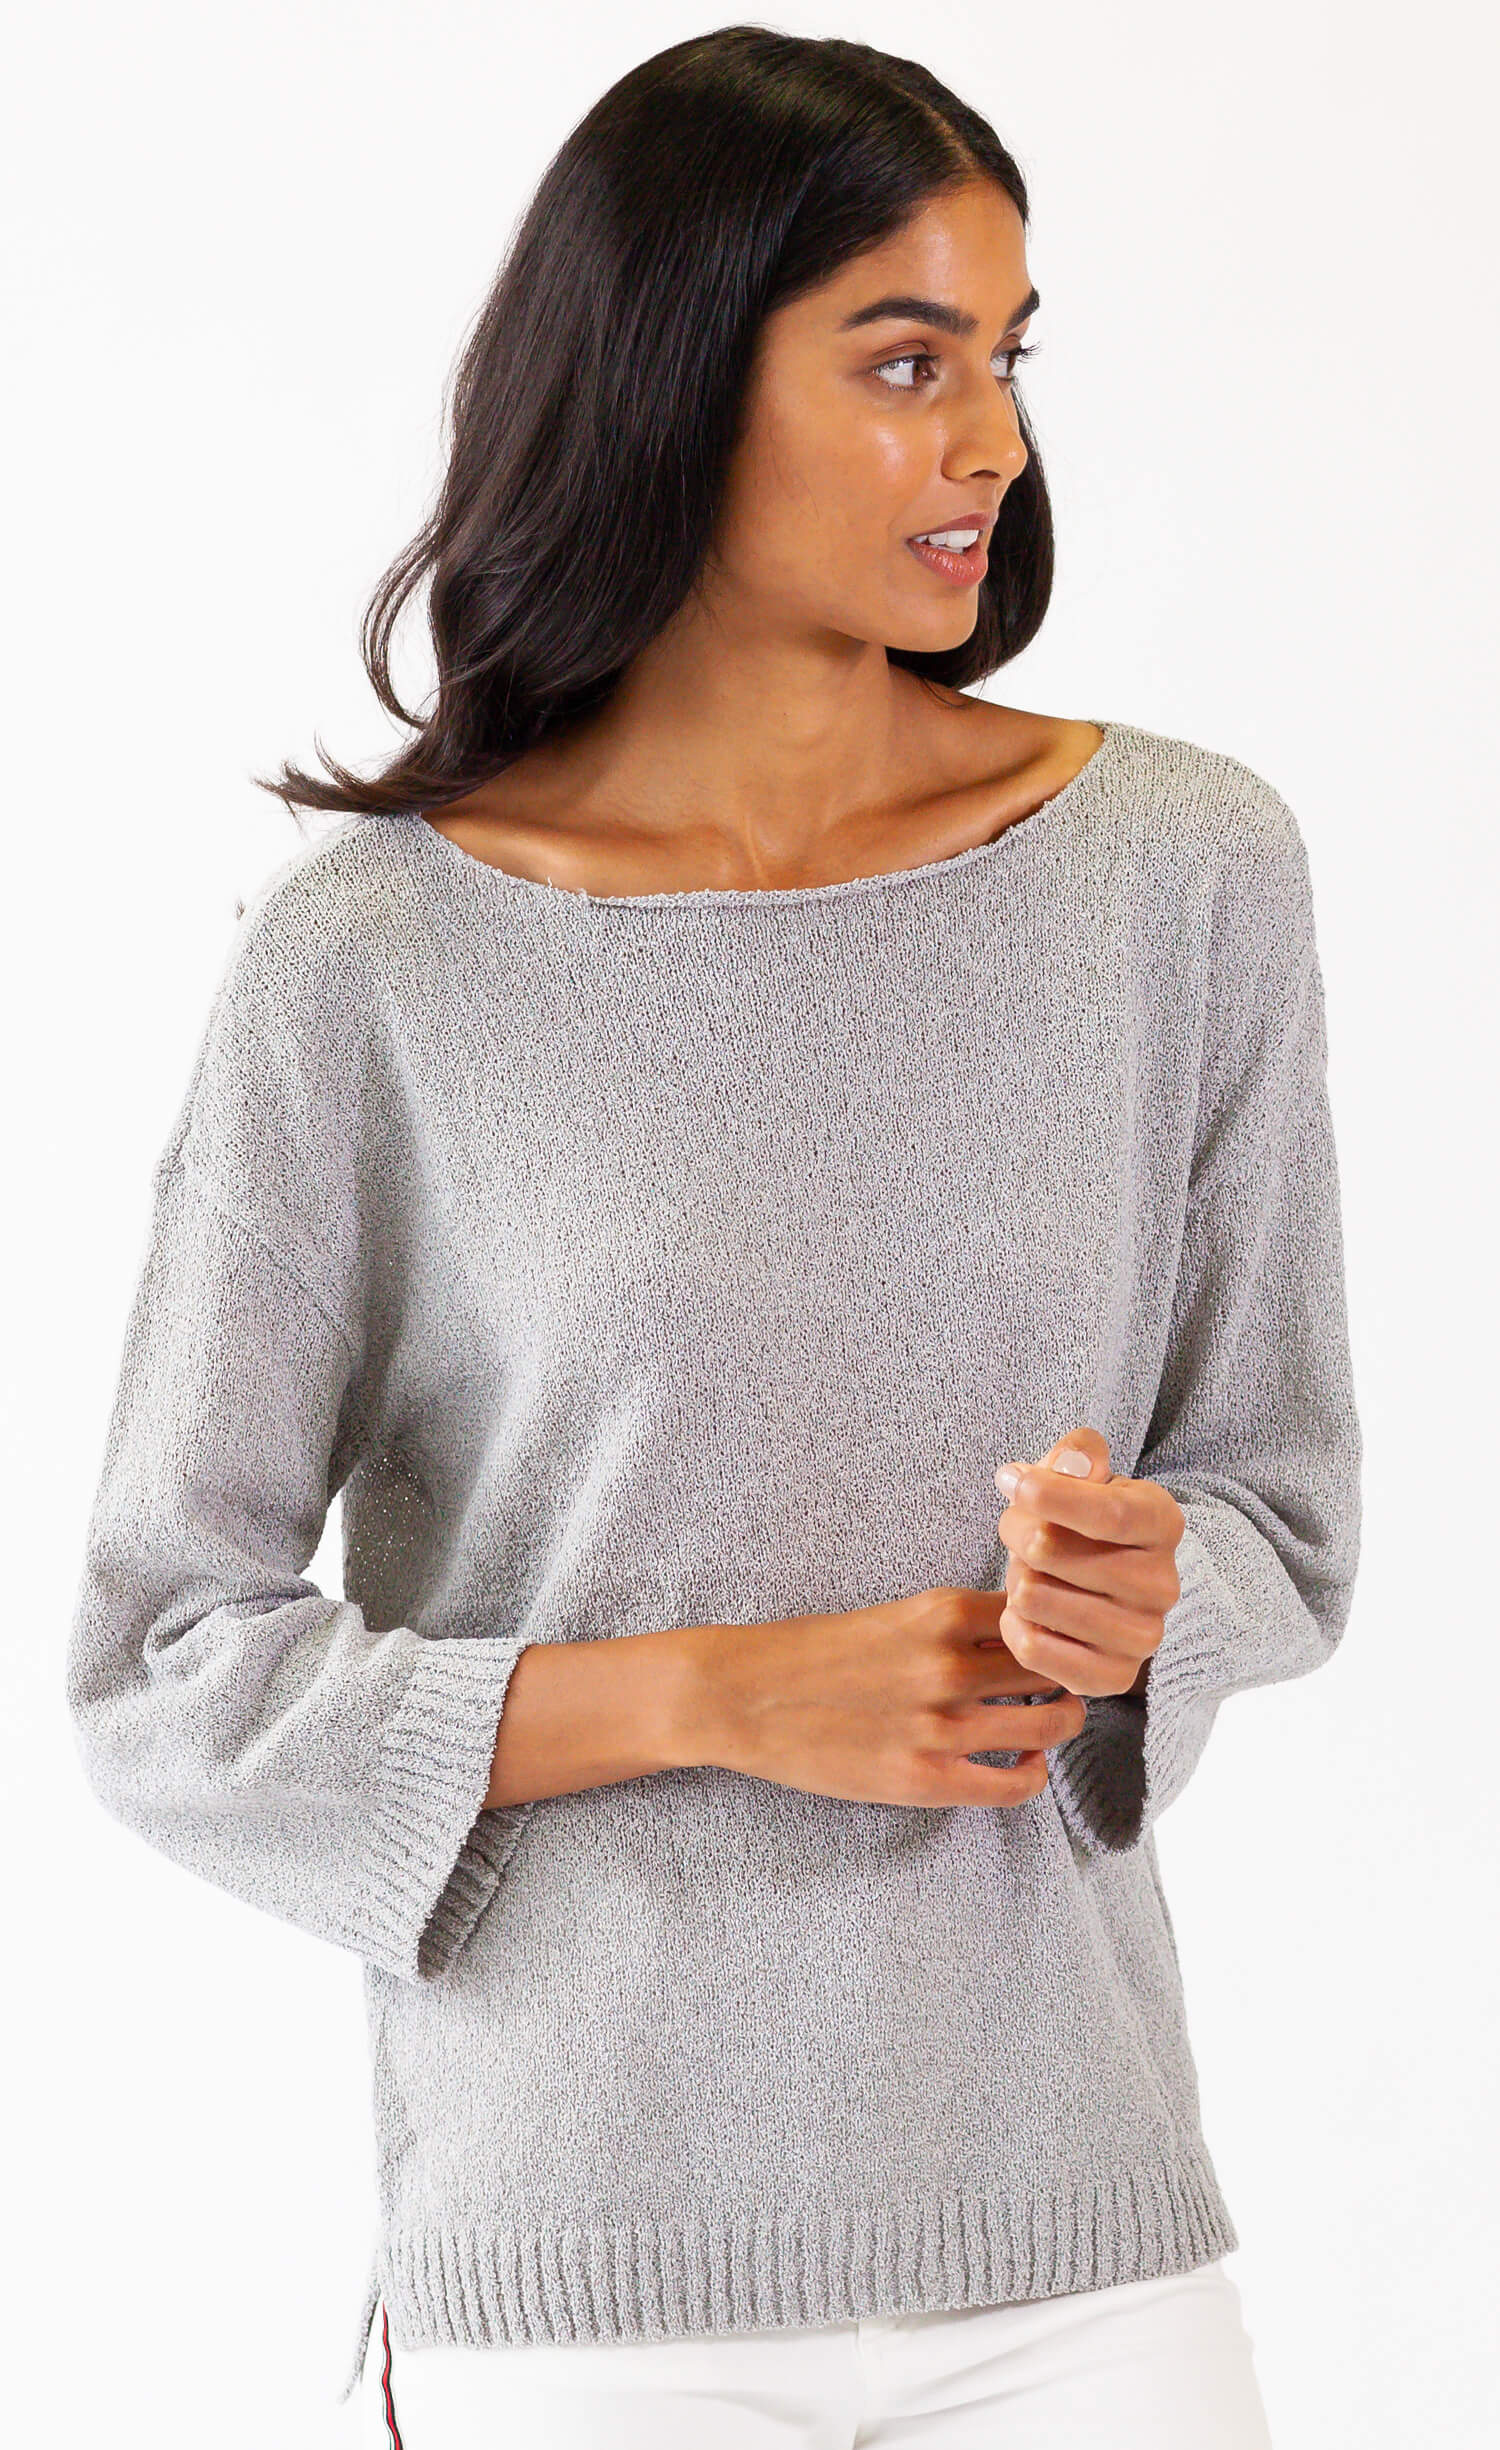 Save Tonight Sweater - Pink Martini Collection